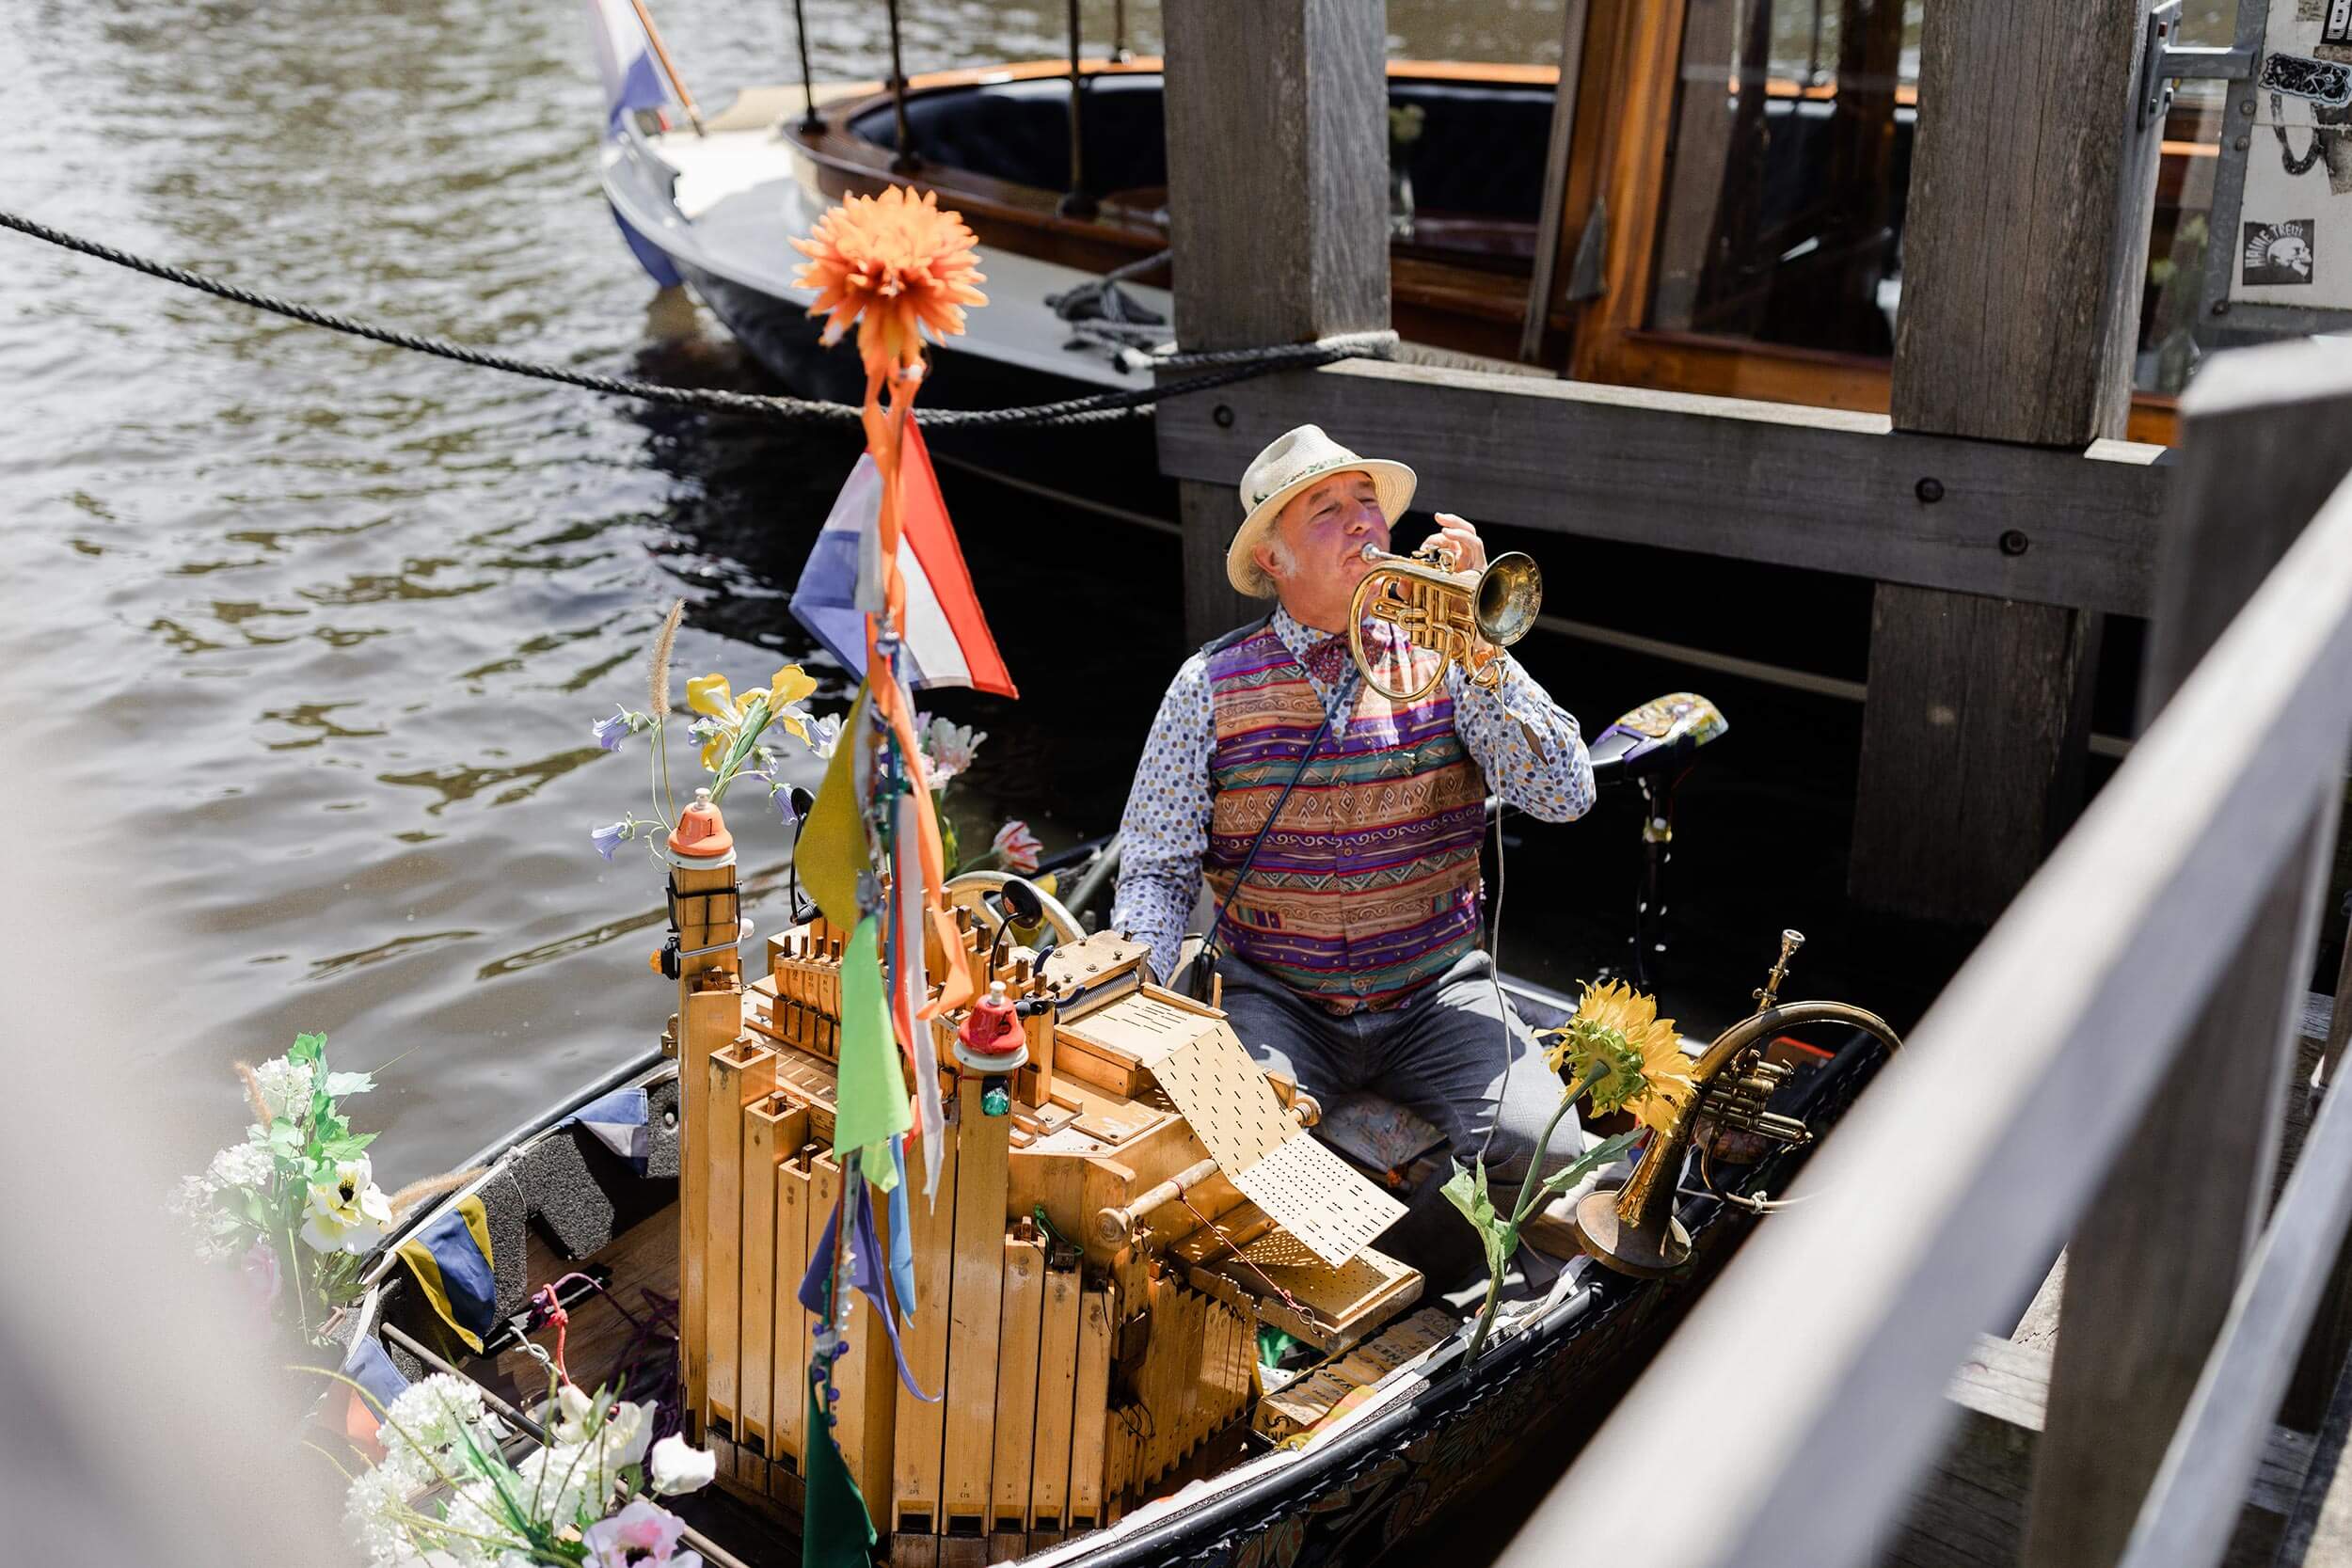 alt="summer Amsterdam wedding with music from muziekboot on the river Amstel"